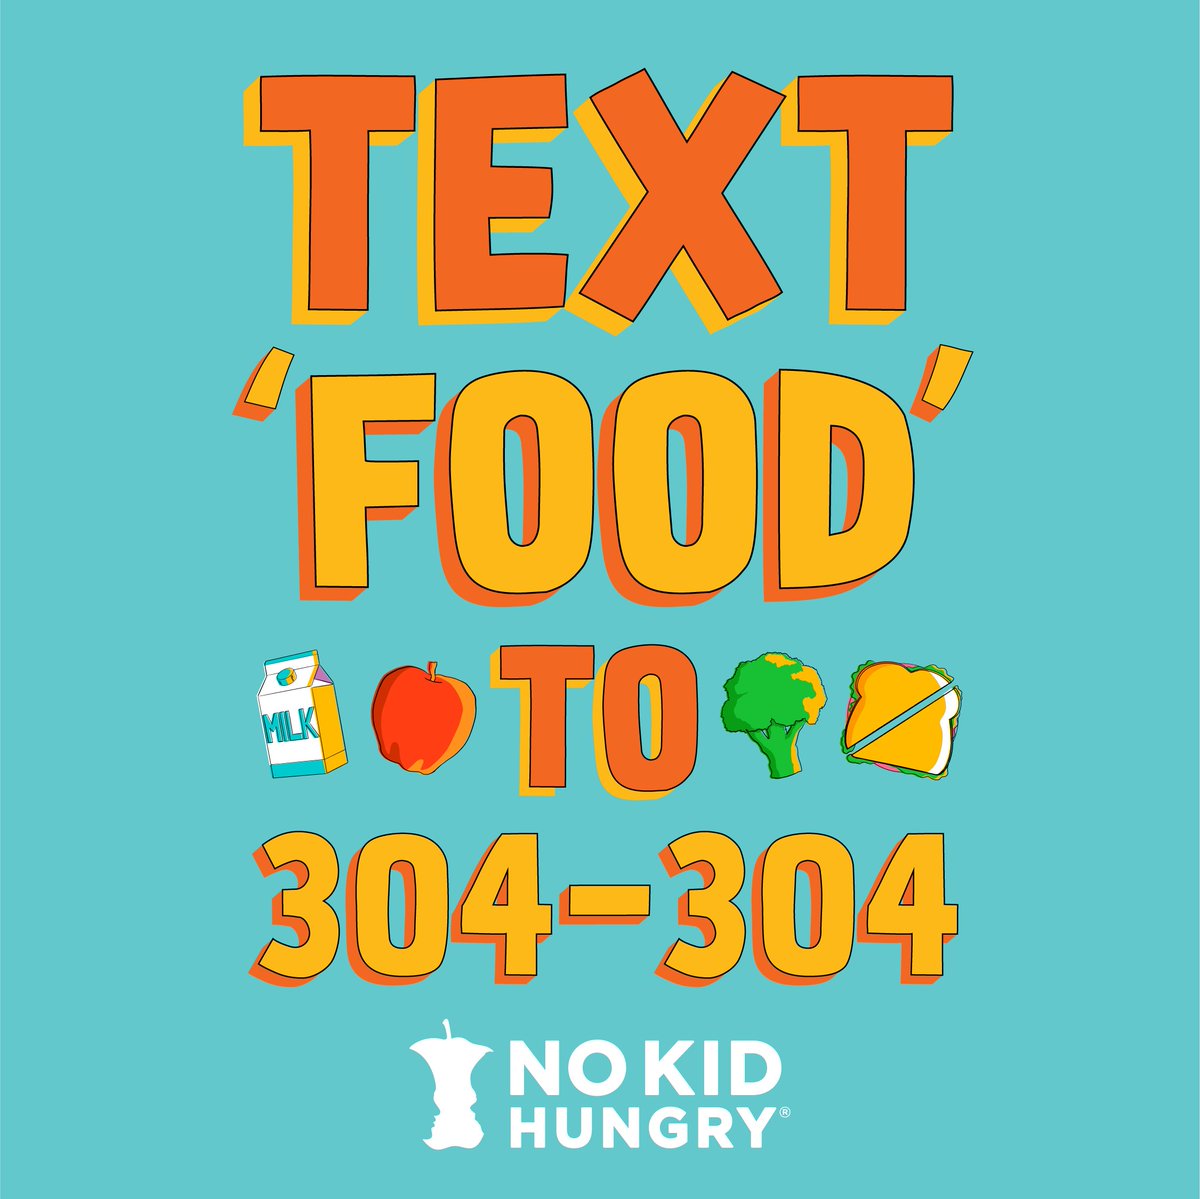 Free summer meals for kids and teens are no hassle! No applications, no sign-ups - just stop by and enjoy! Text FOOD or COMIDA to 304-304 to find a site near you, or visit @NoKidHungry's Free Meal Finder: bit.ly/3E77uKg #ShareSummer